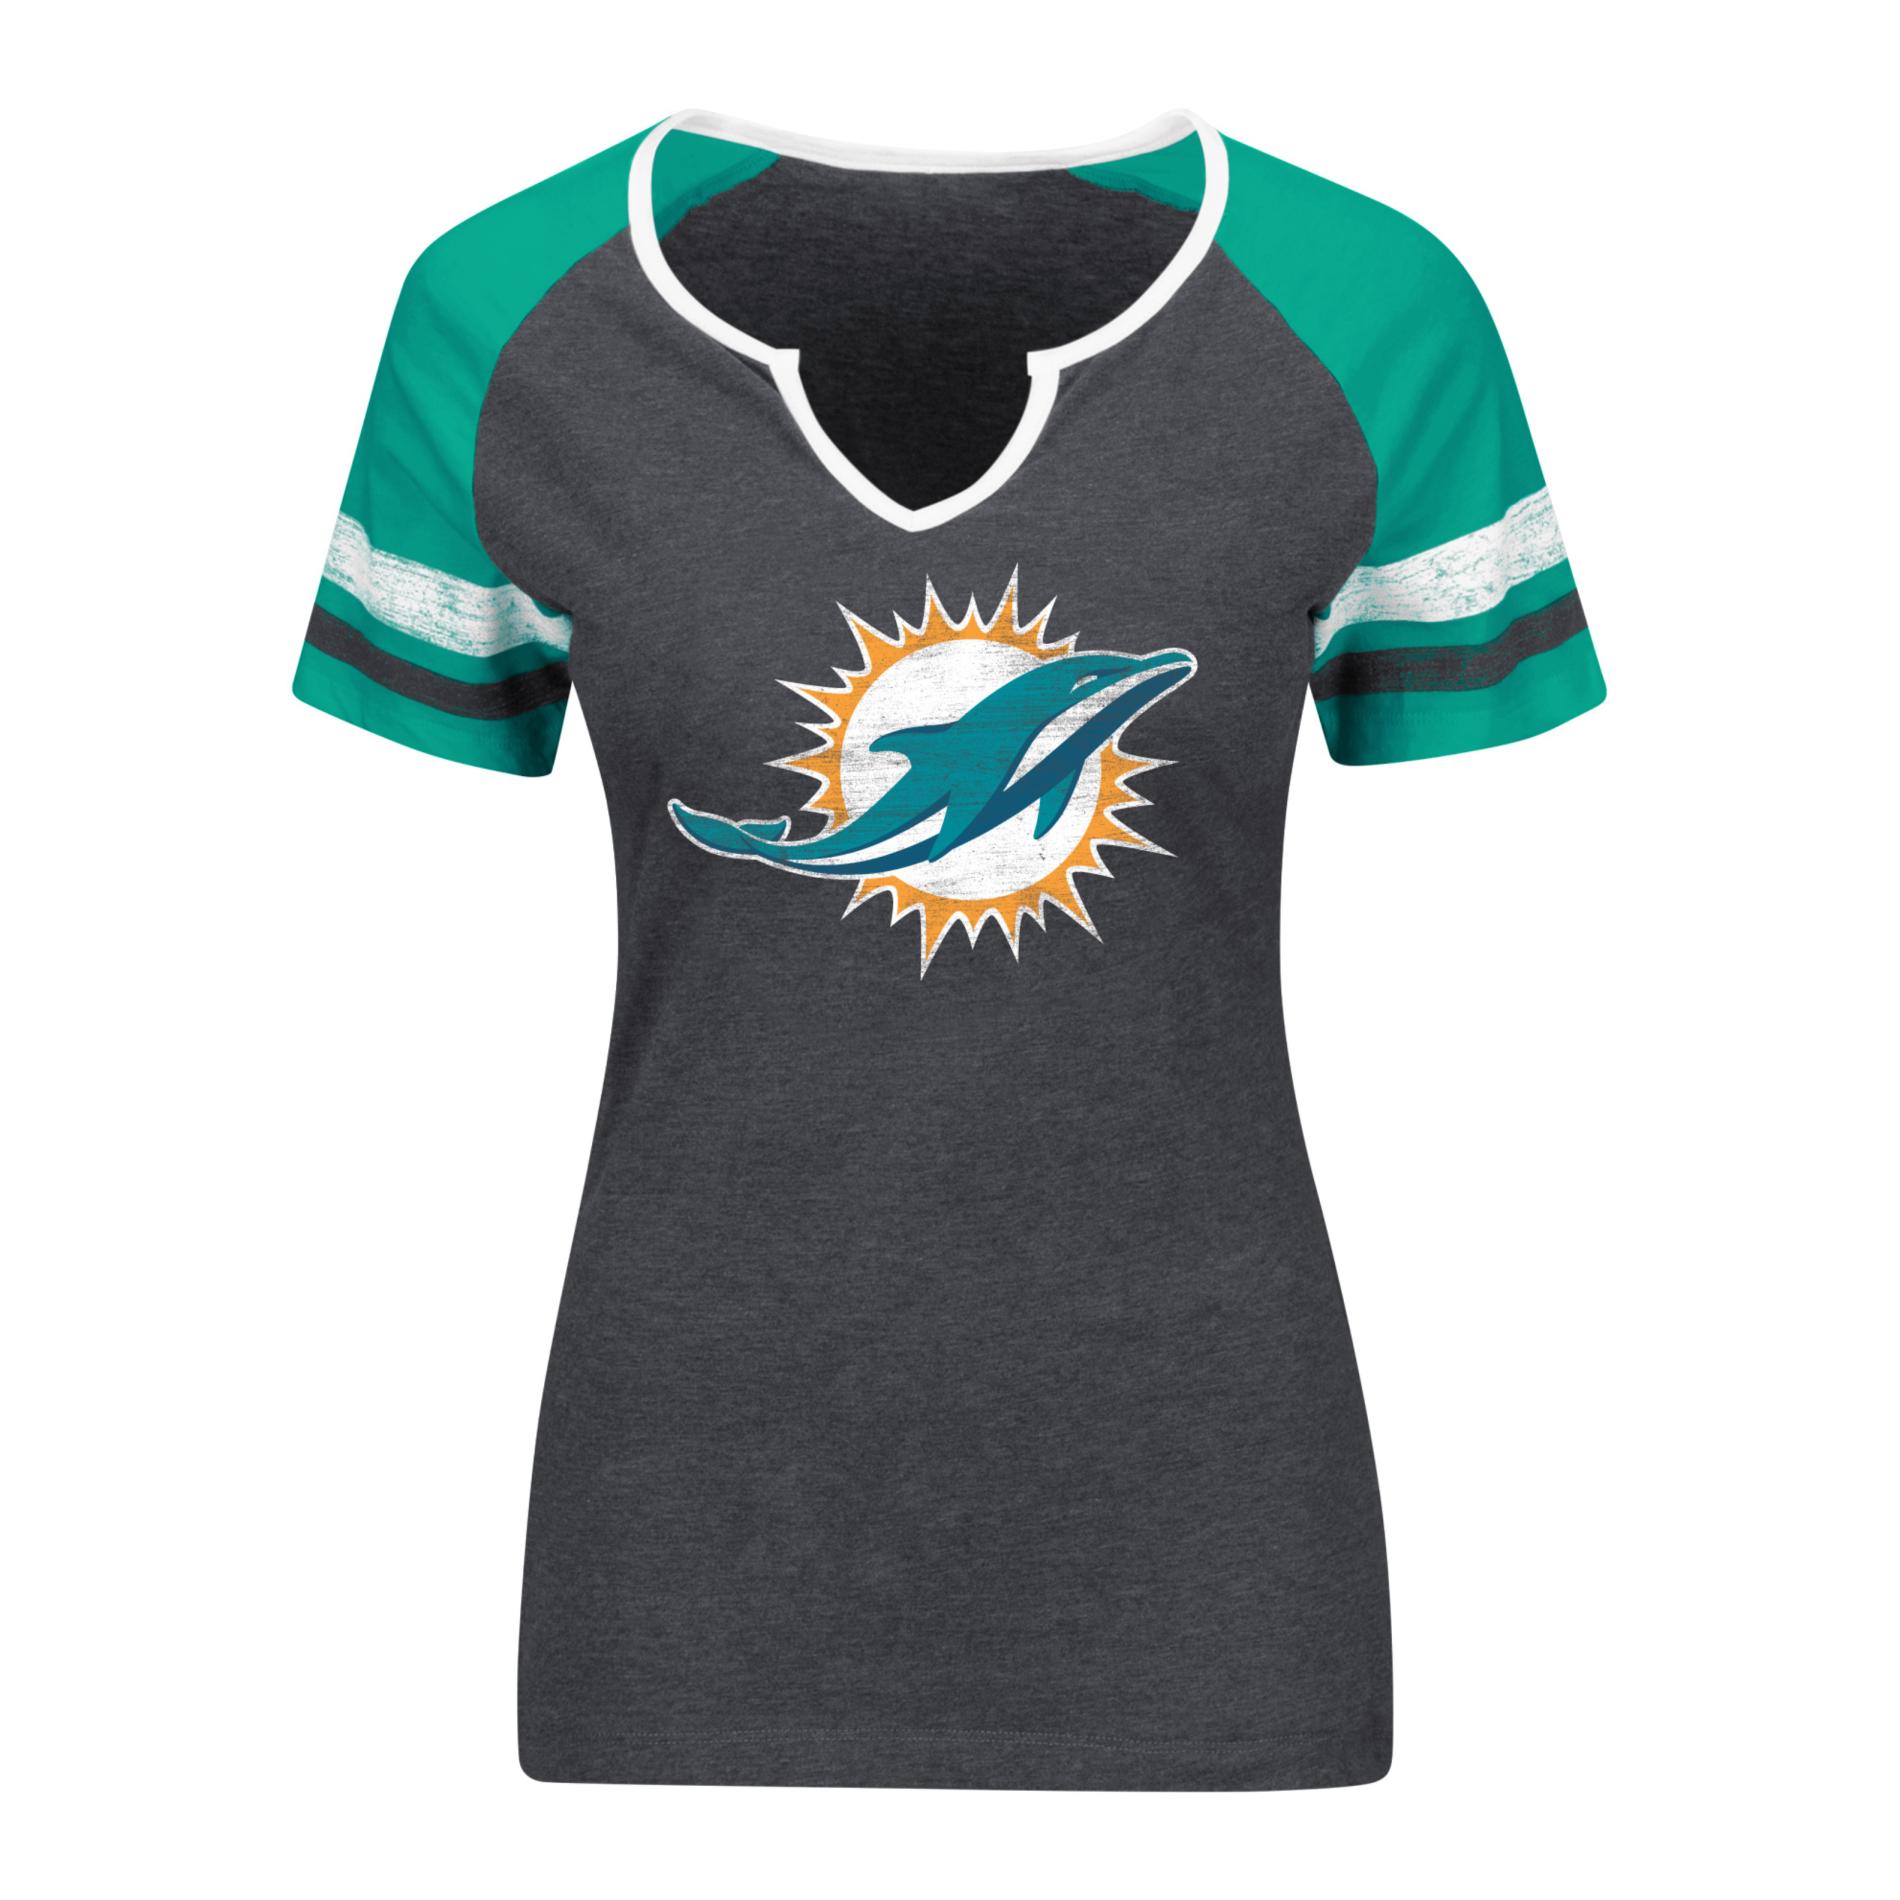 NFL Women's Notched Neck Graphic T-Shirt - Miami Dolphins